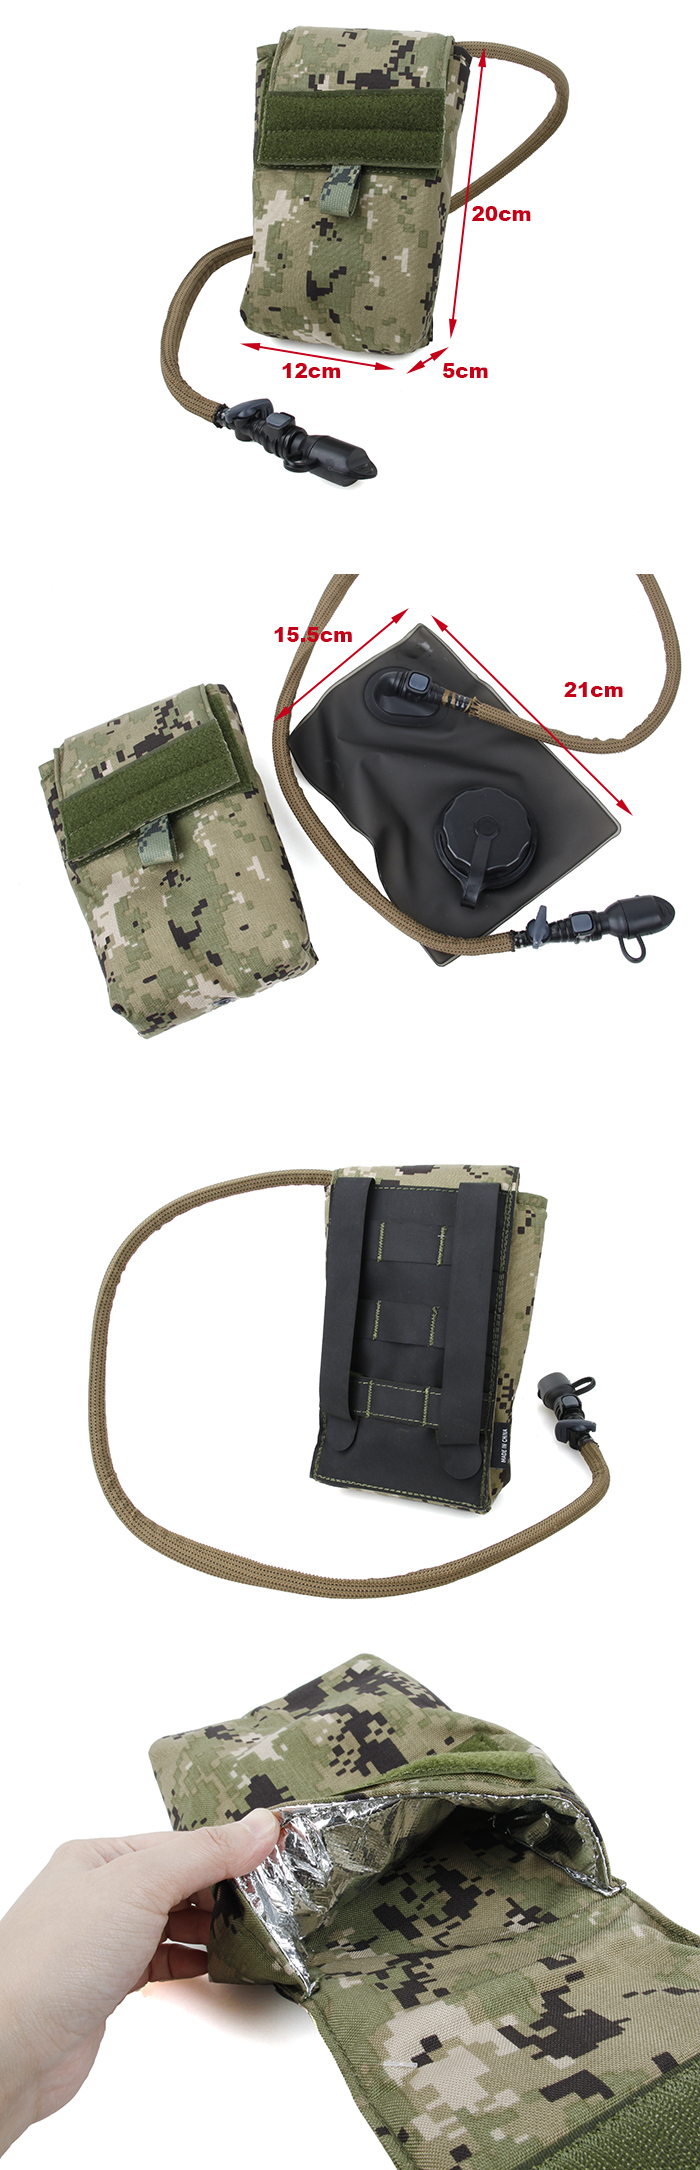 TMC Lightweight Recon Hydration Pouch - Weapon762